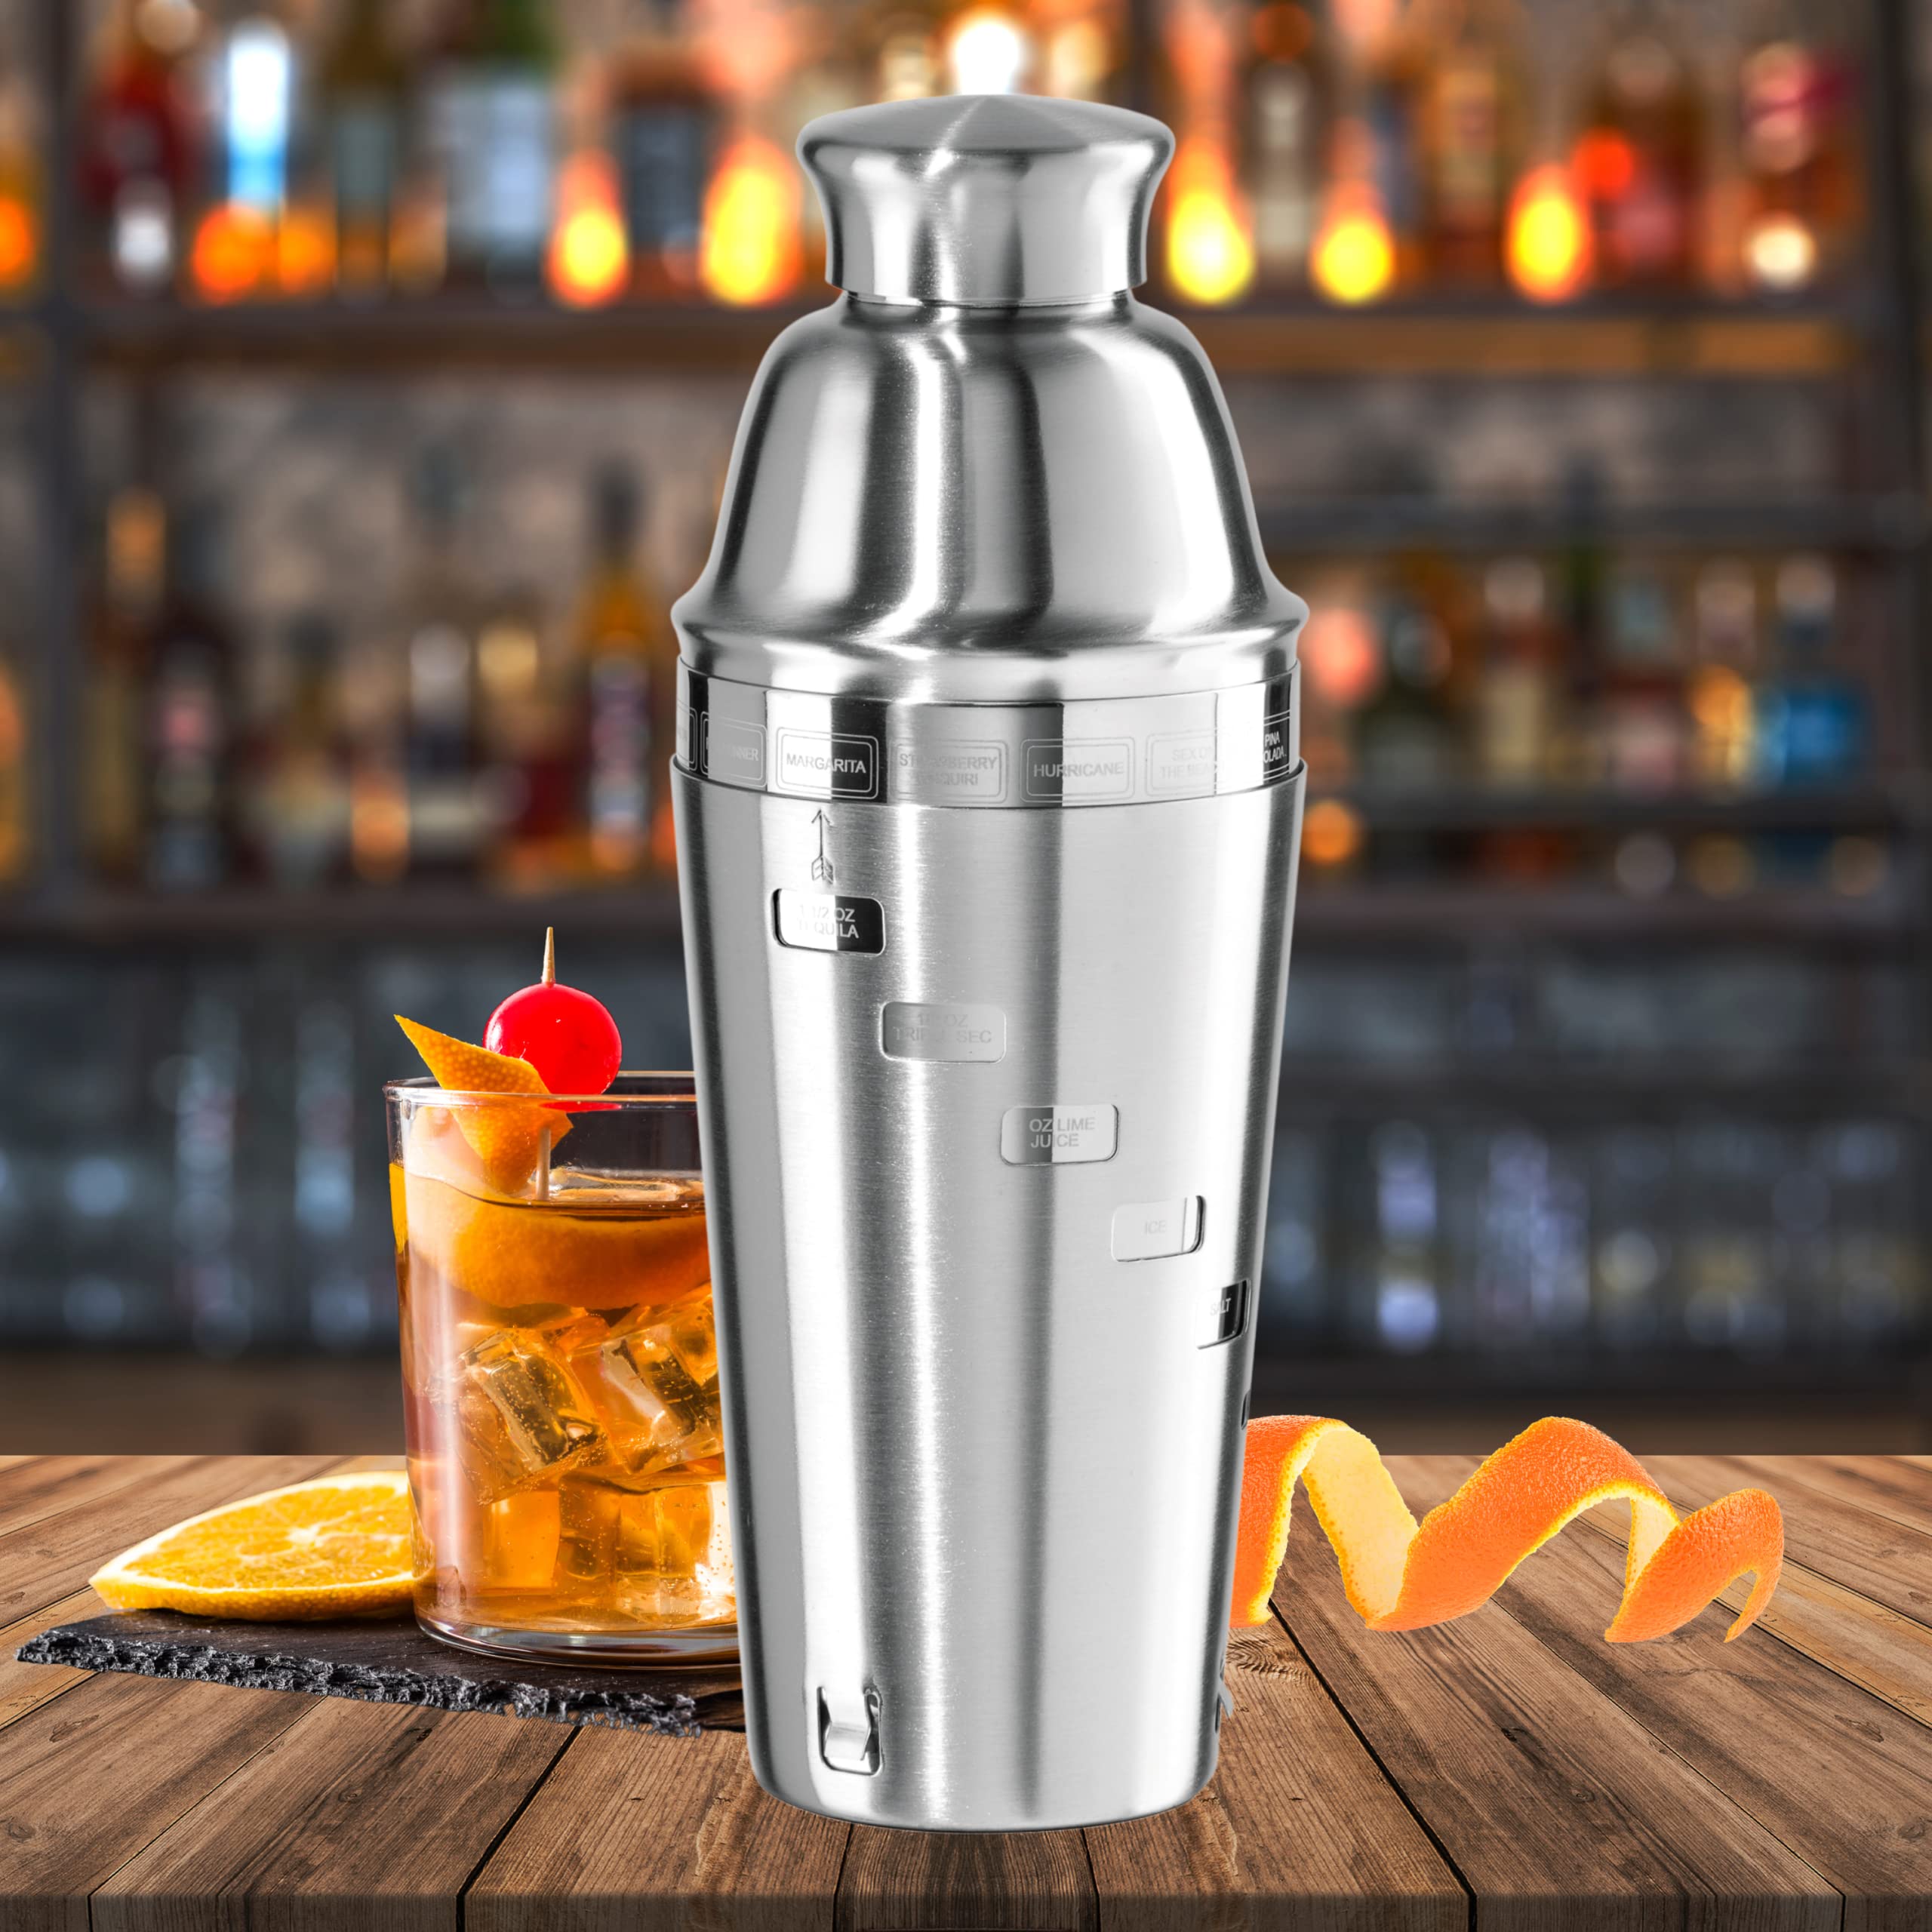 OGGI Dial A Drink Cocktail Shaker - Stainless Steel, 15 Recipes, Built in Strainer, 34 oz - The Original and Only Dial A Drink - Ideal Home Bar Drink Mixer, Bartender Kit, Essential Bar Accessories